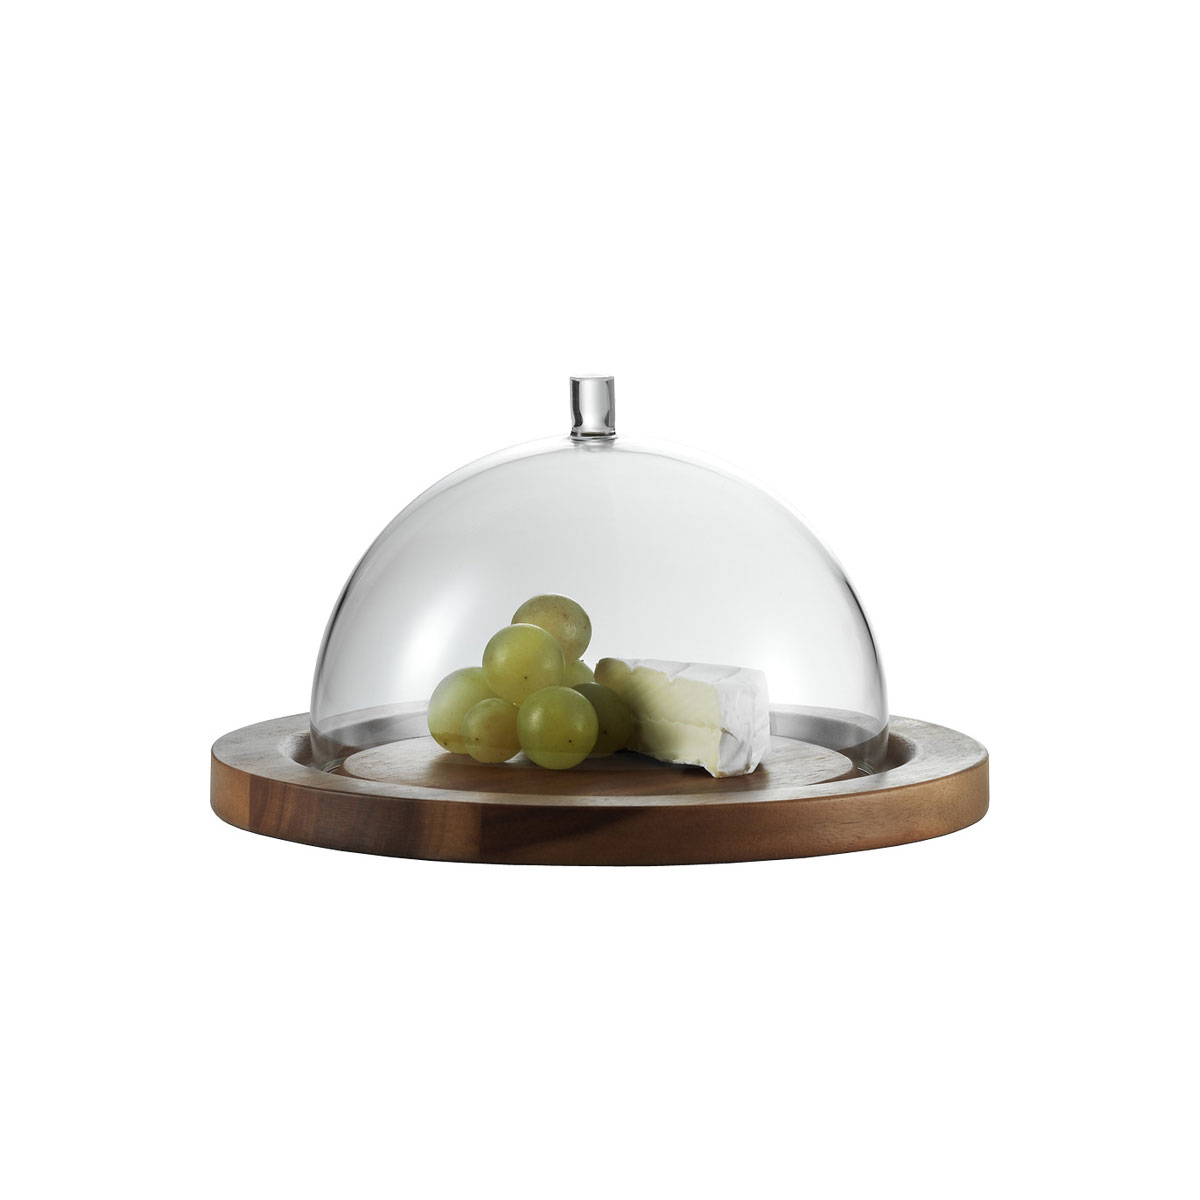 Jenaer Glas Cheese Dome With Acacia Plate